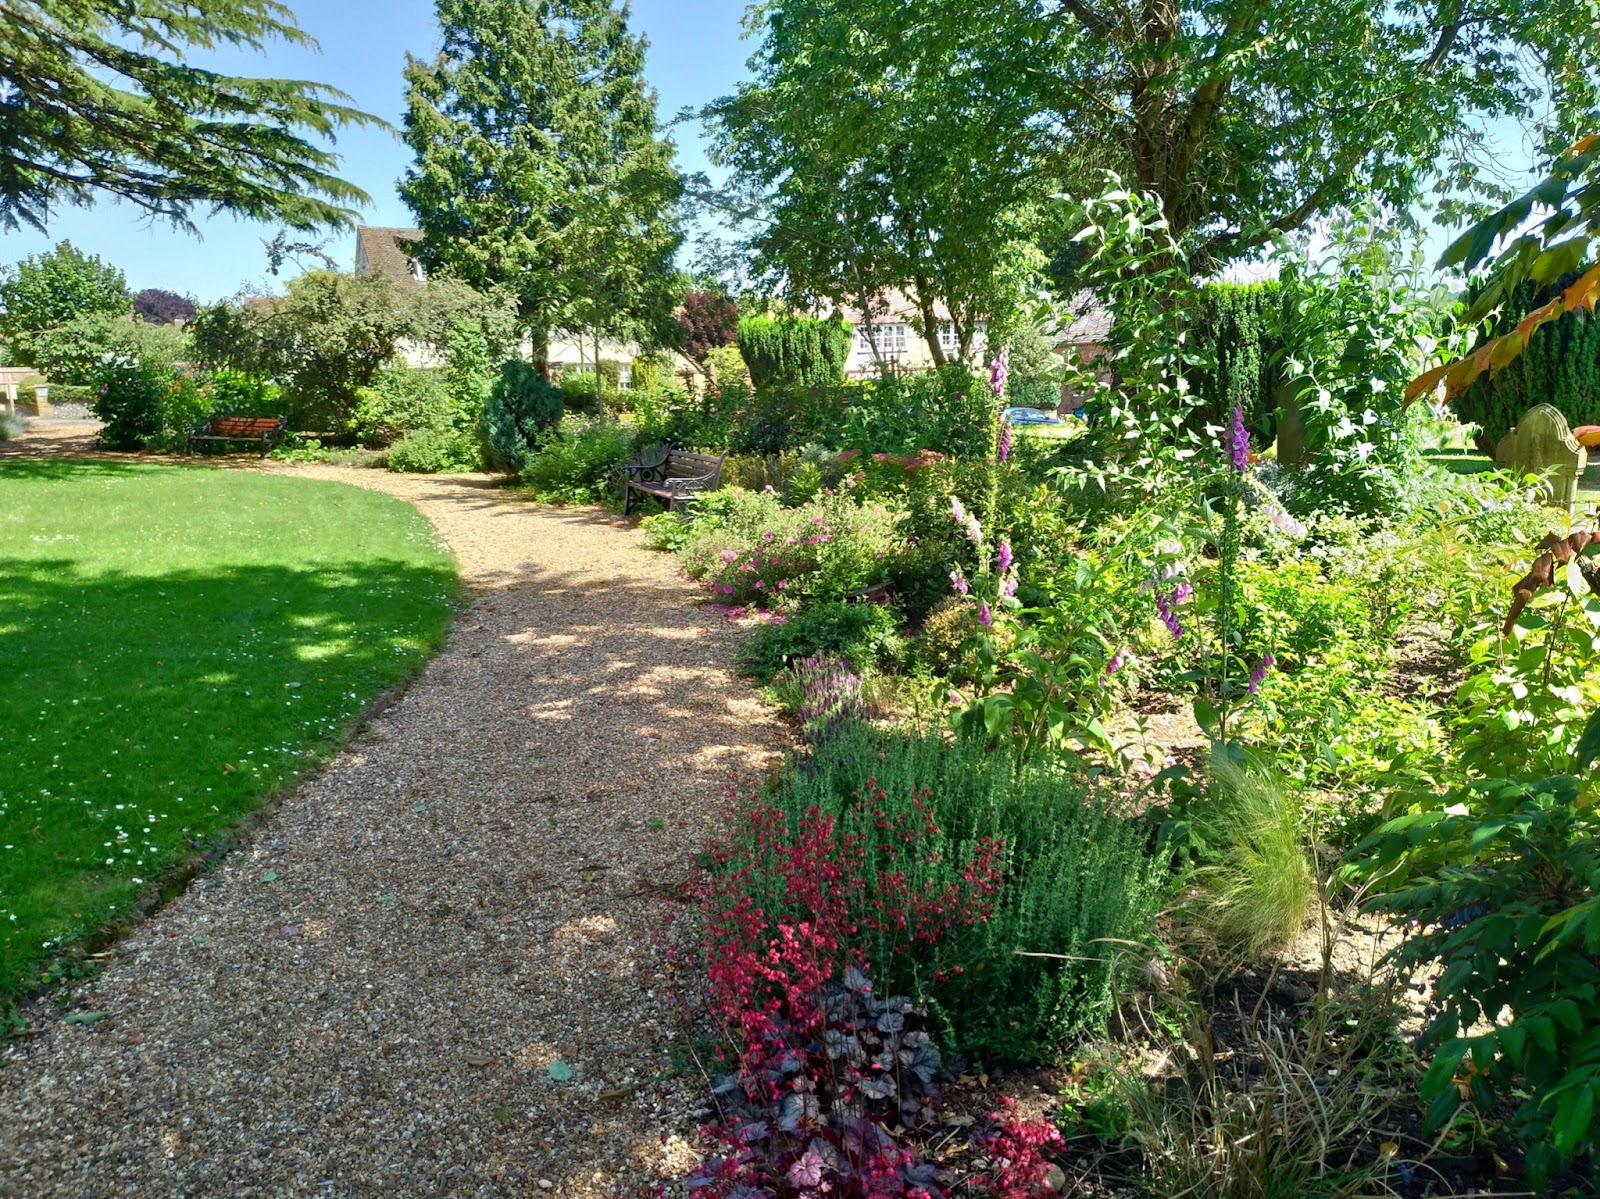 Gravel pathway in English country garden